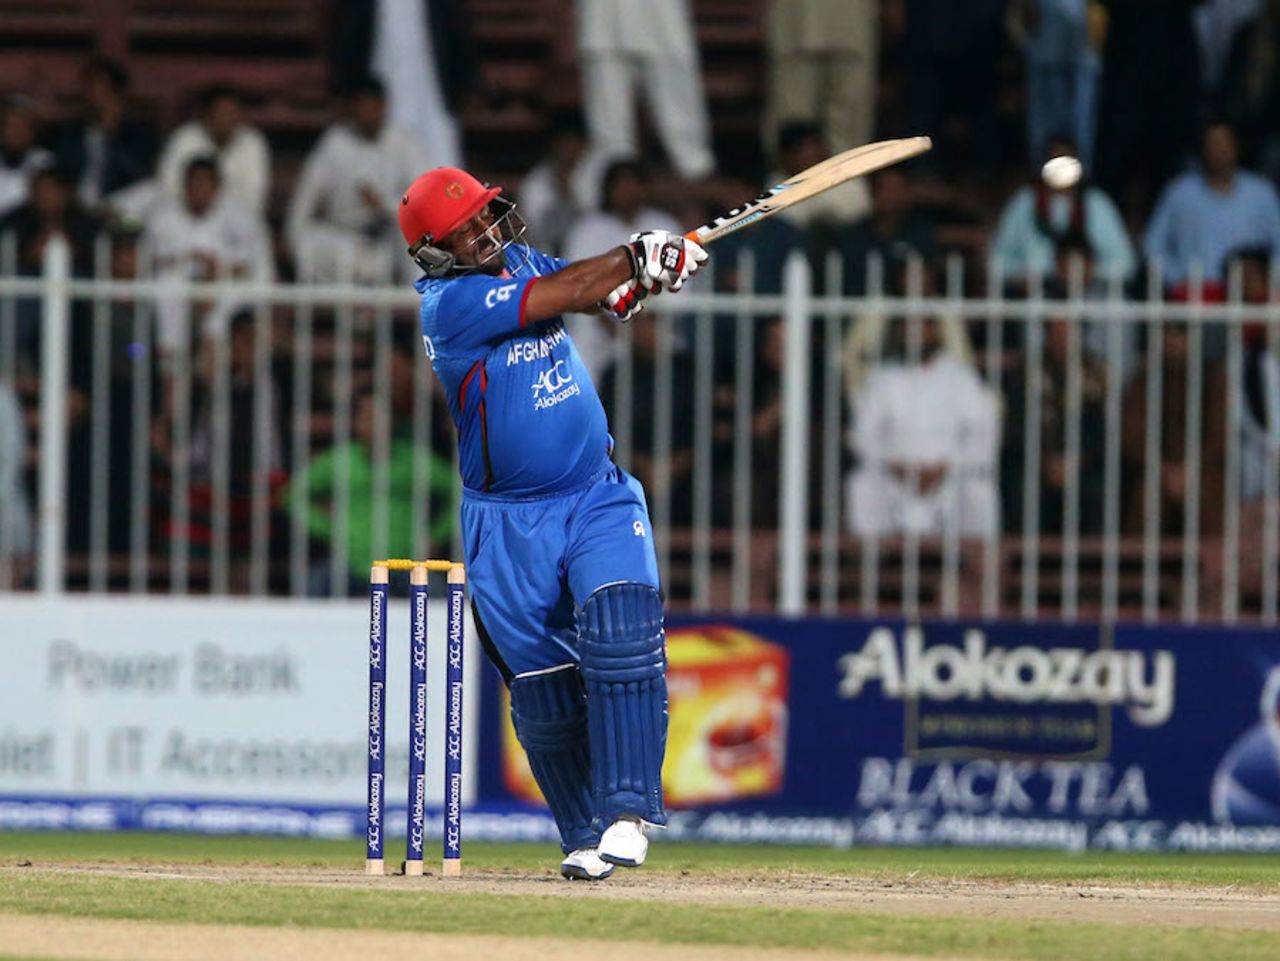 Mohammad Shahzad unleashes one of his pulls, Afghanistan v Zimbabwe, 2nd T20I, Sharjah, January 10, 2016